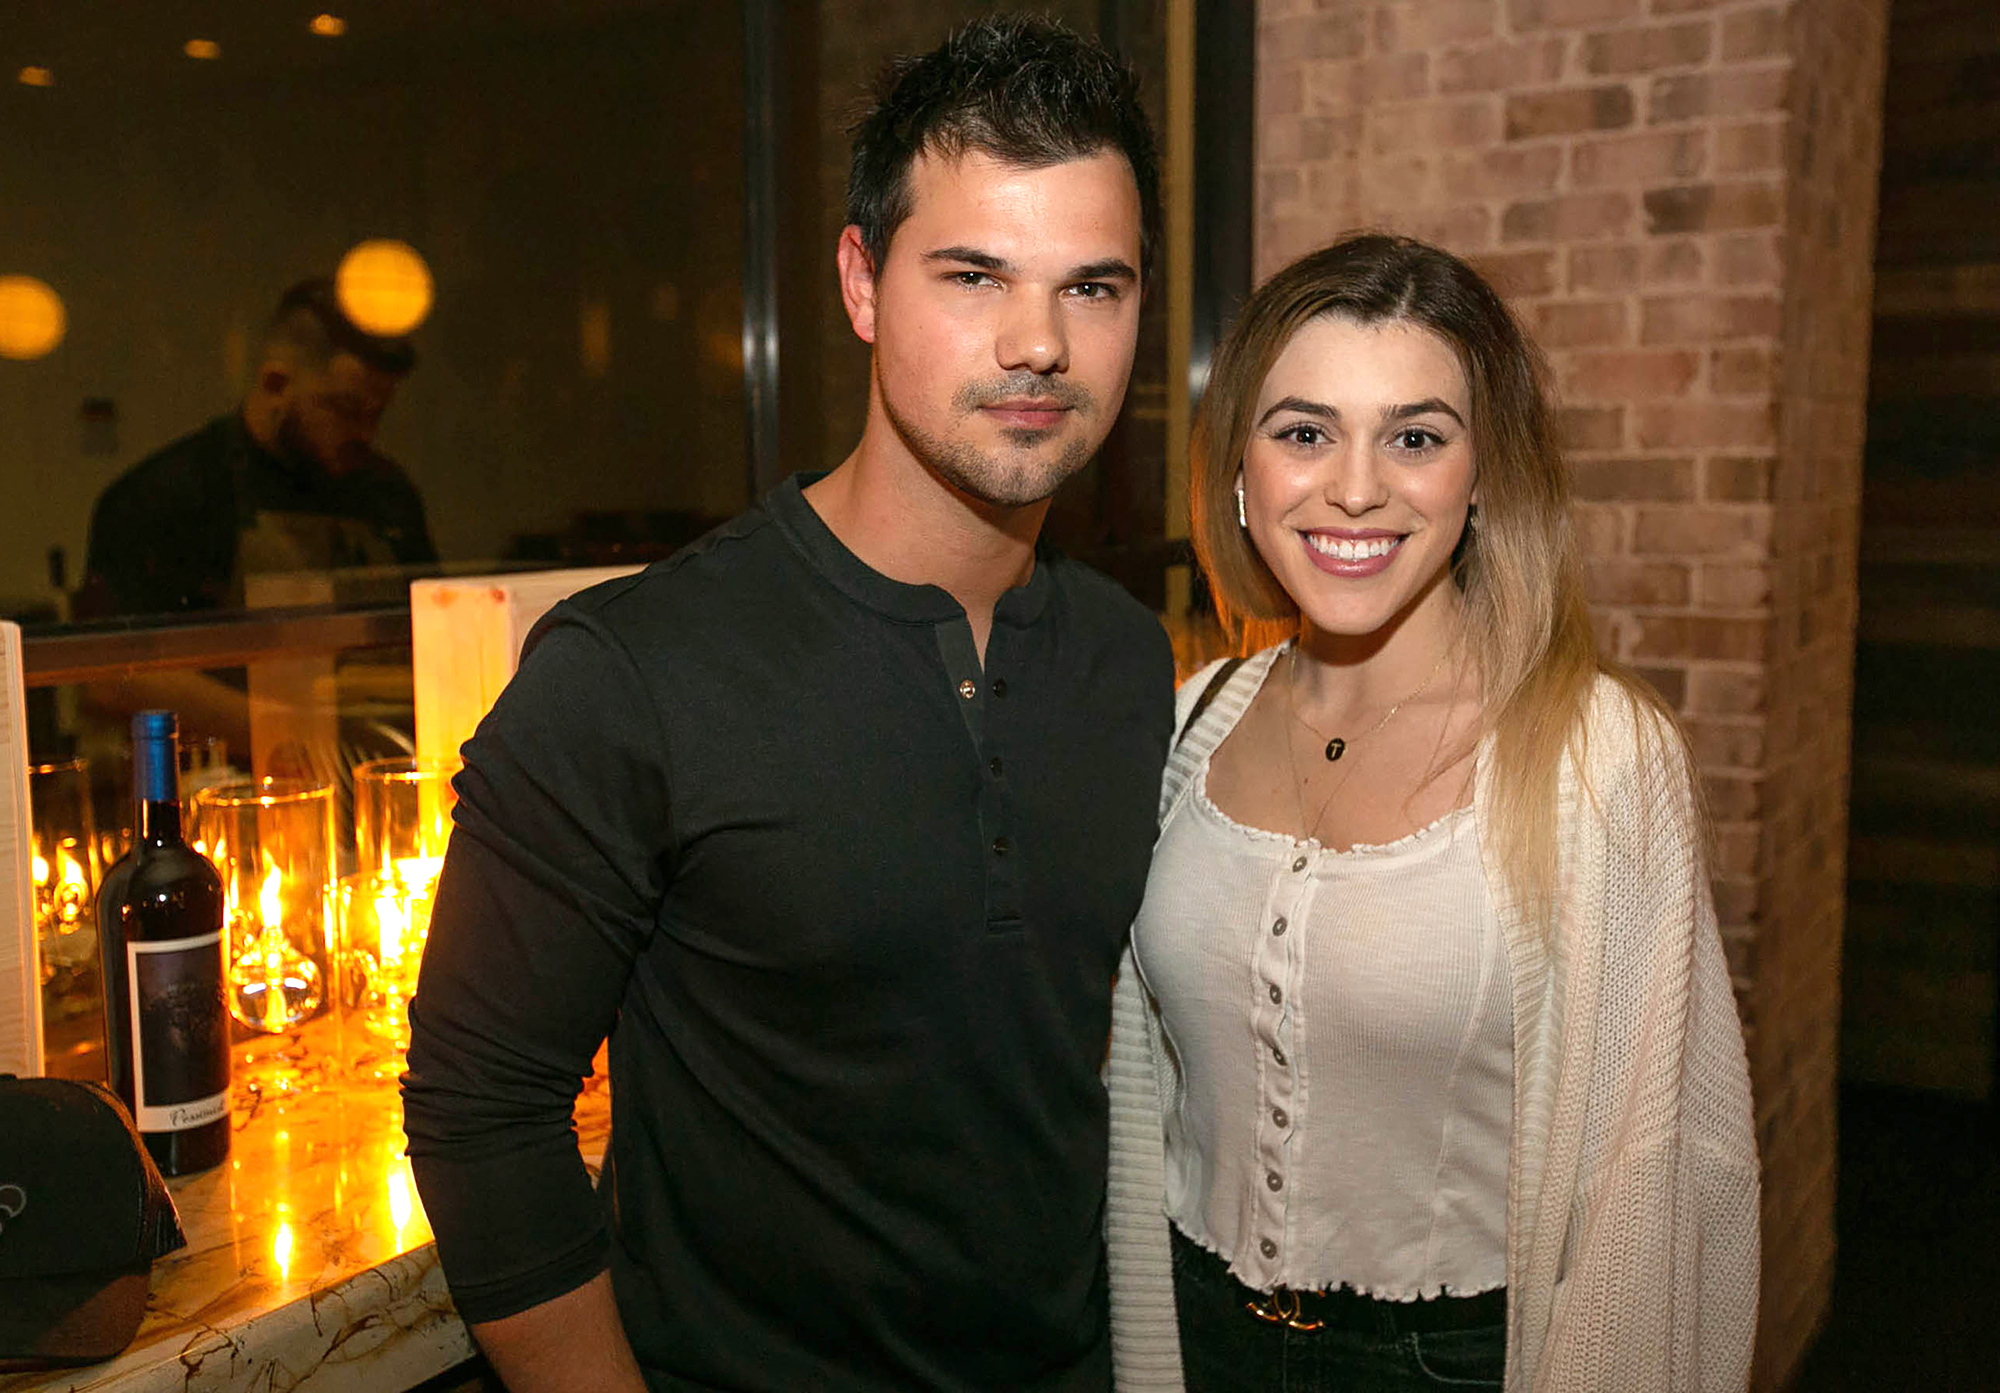 Who Is Taylor Dome? Taylor Lautner's Fiancee Details